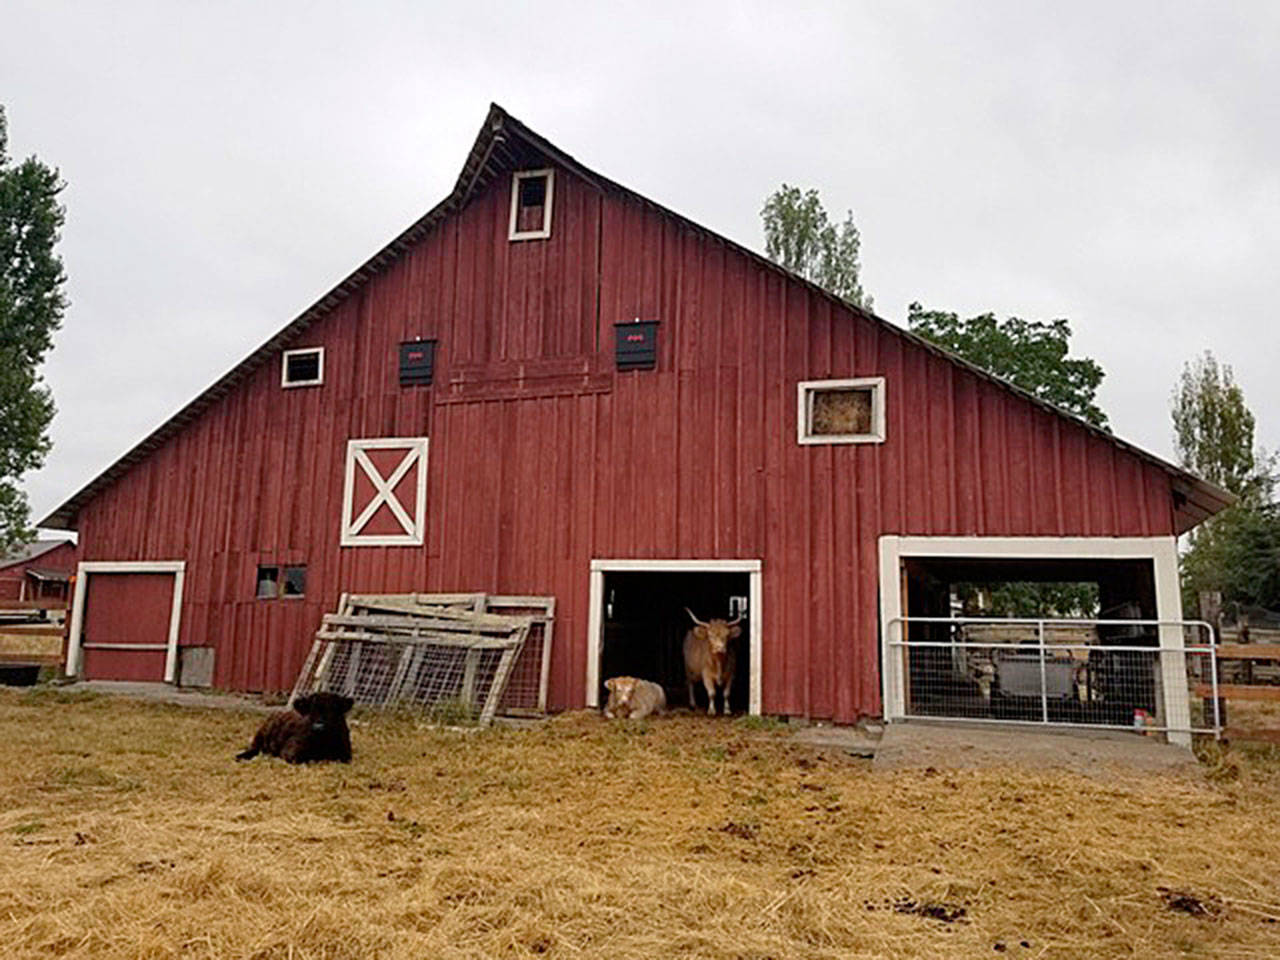 Neinhuis Dutch Barn, 2019 Ebey’s Forever Preservation Grant recipient. Photo provided